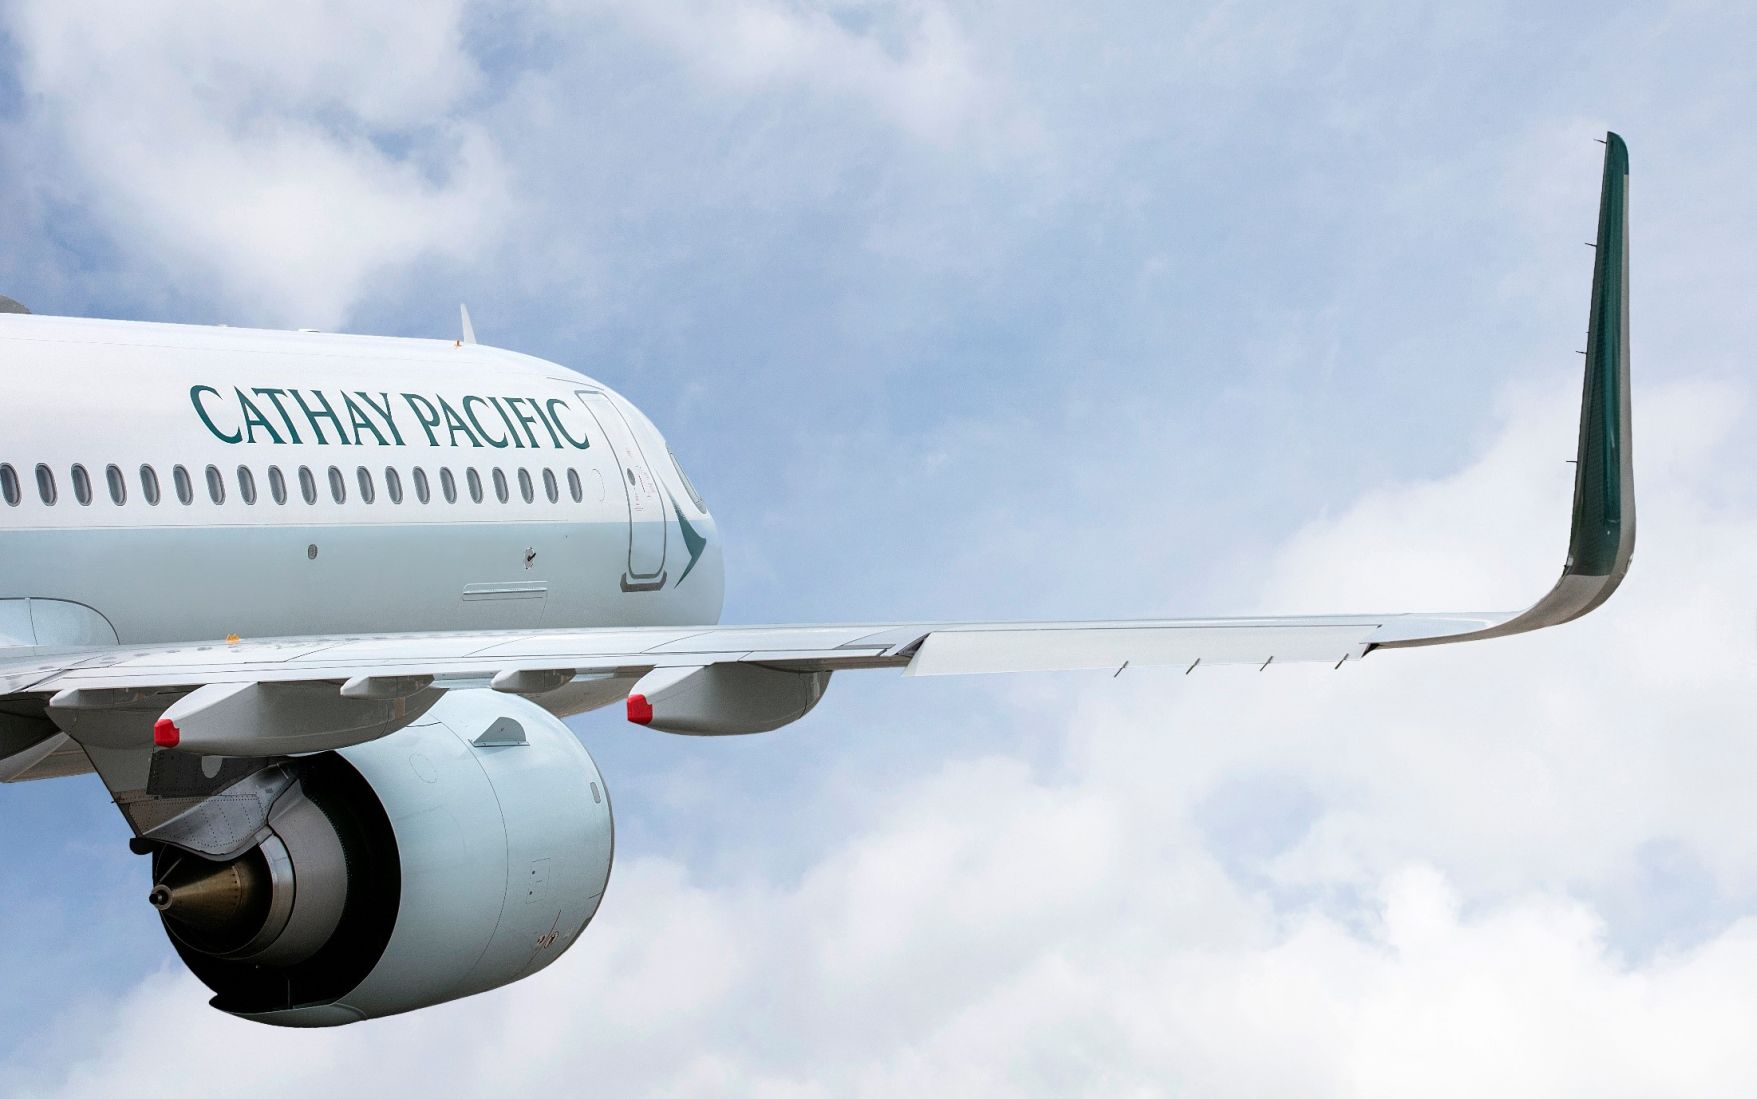 Cathay Pacific set to resume NZ services